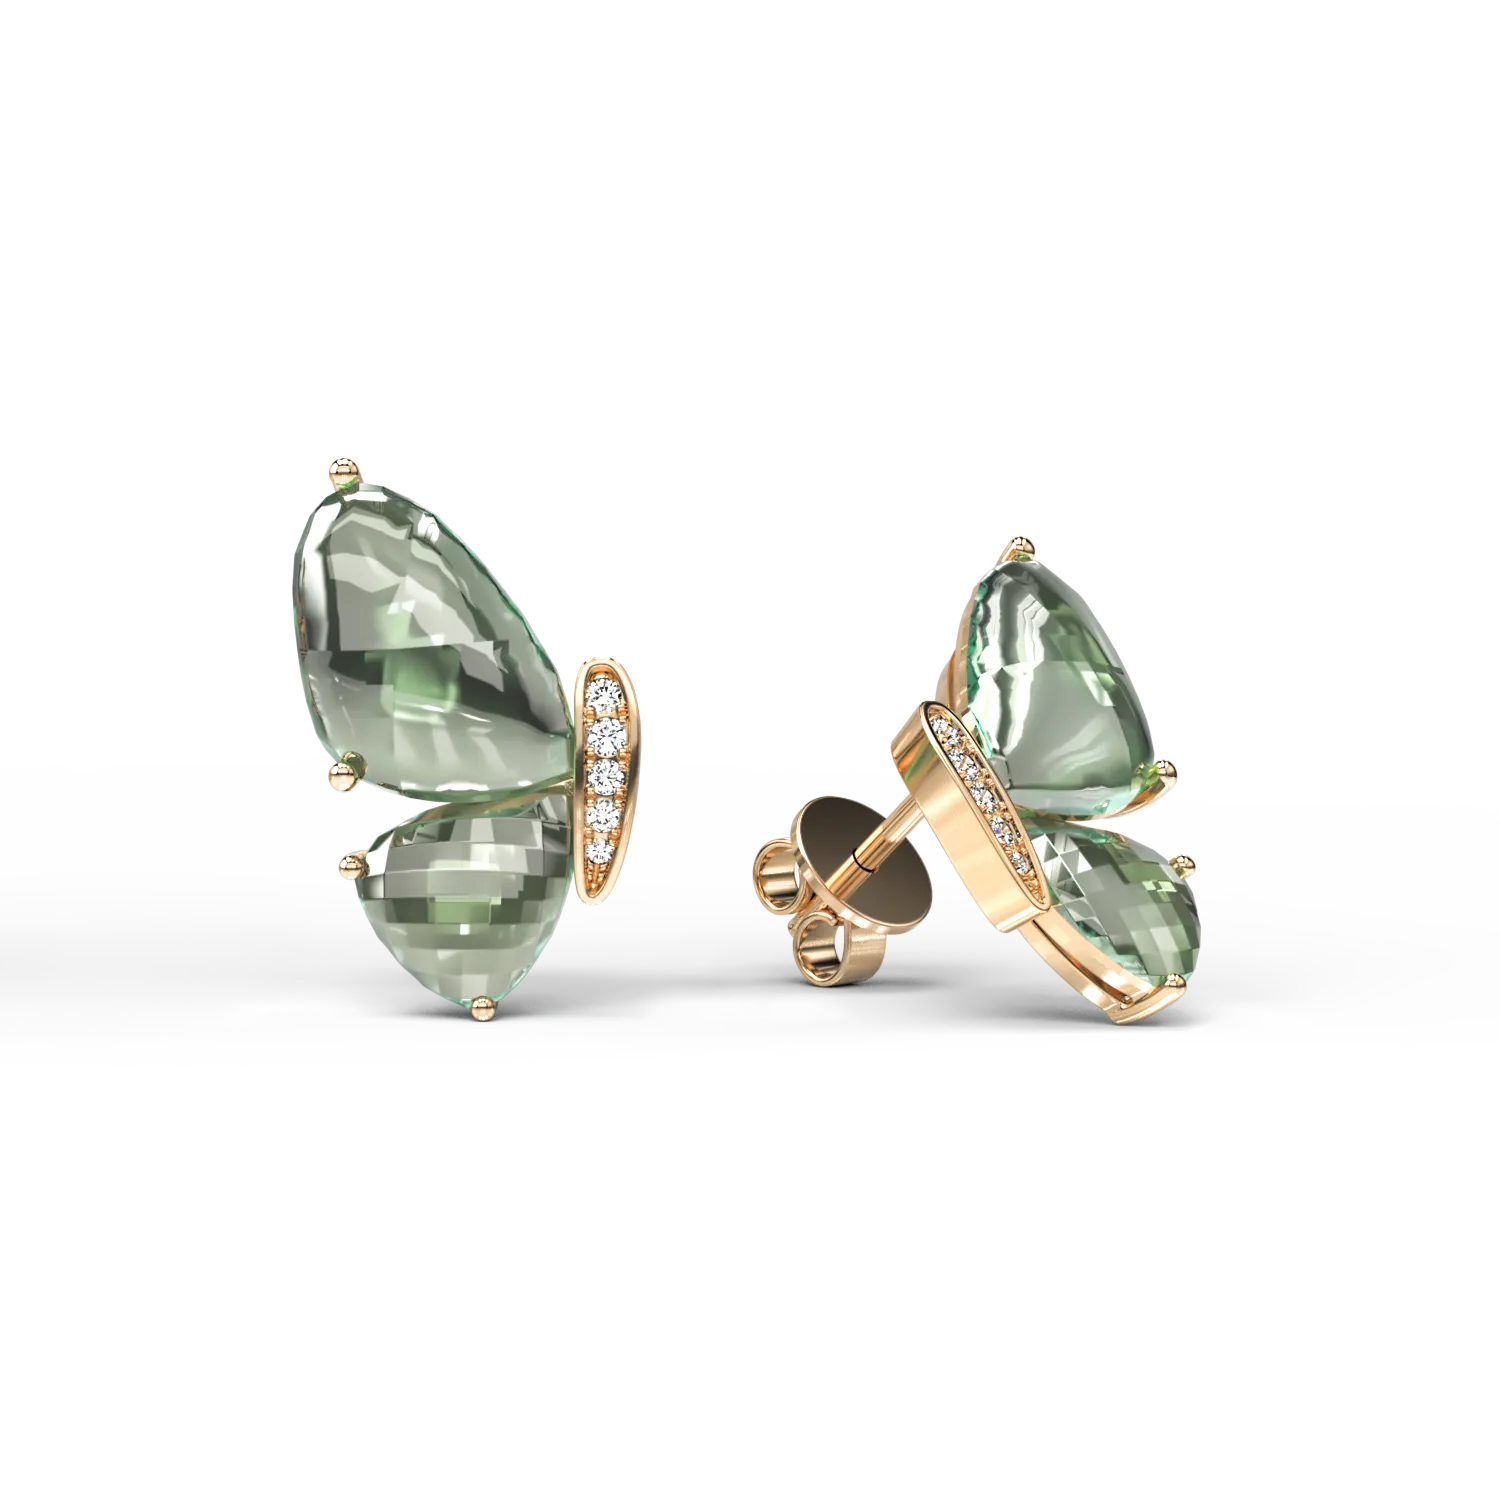 18K yellow gold butterfly earrings with green amethysts of 8.5ct and diamonds of 0.06ct